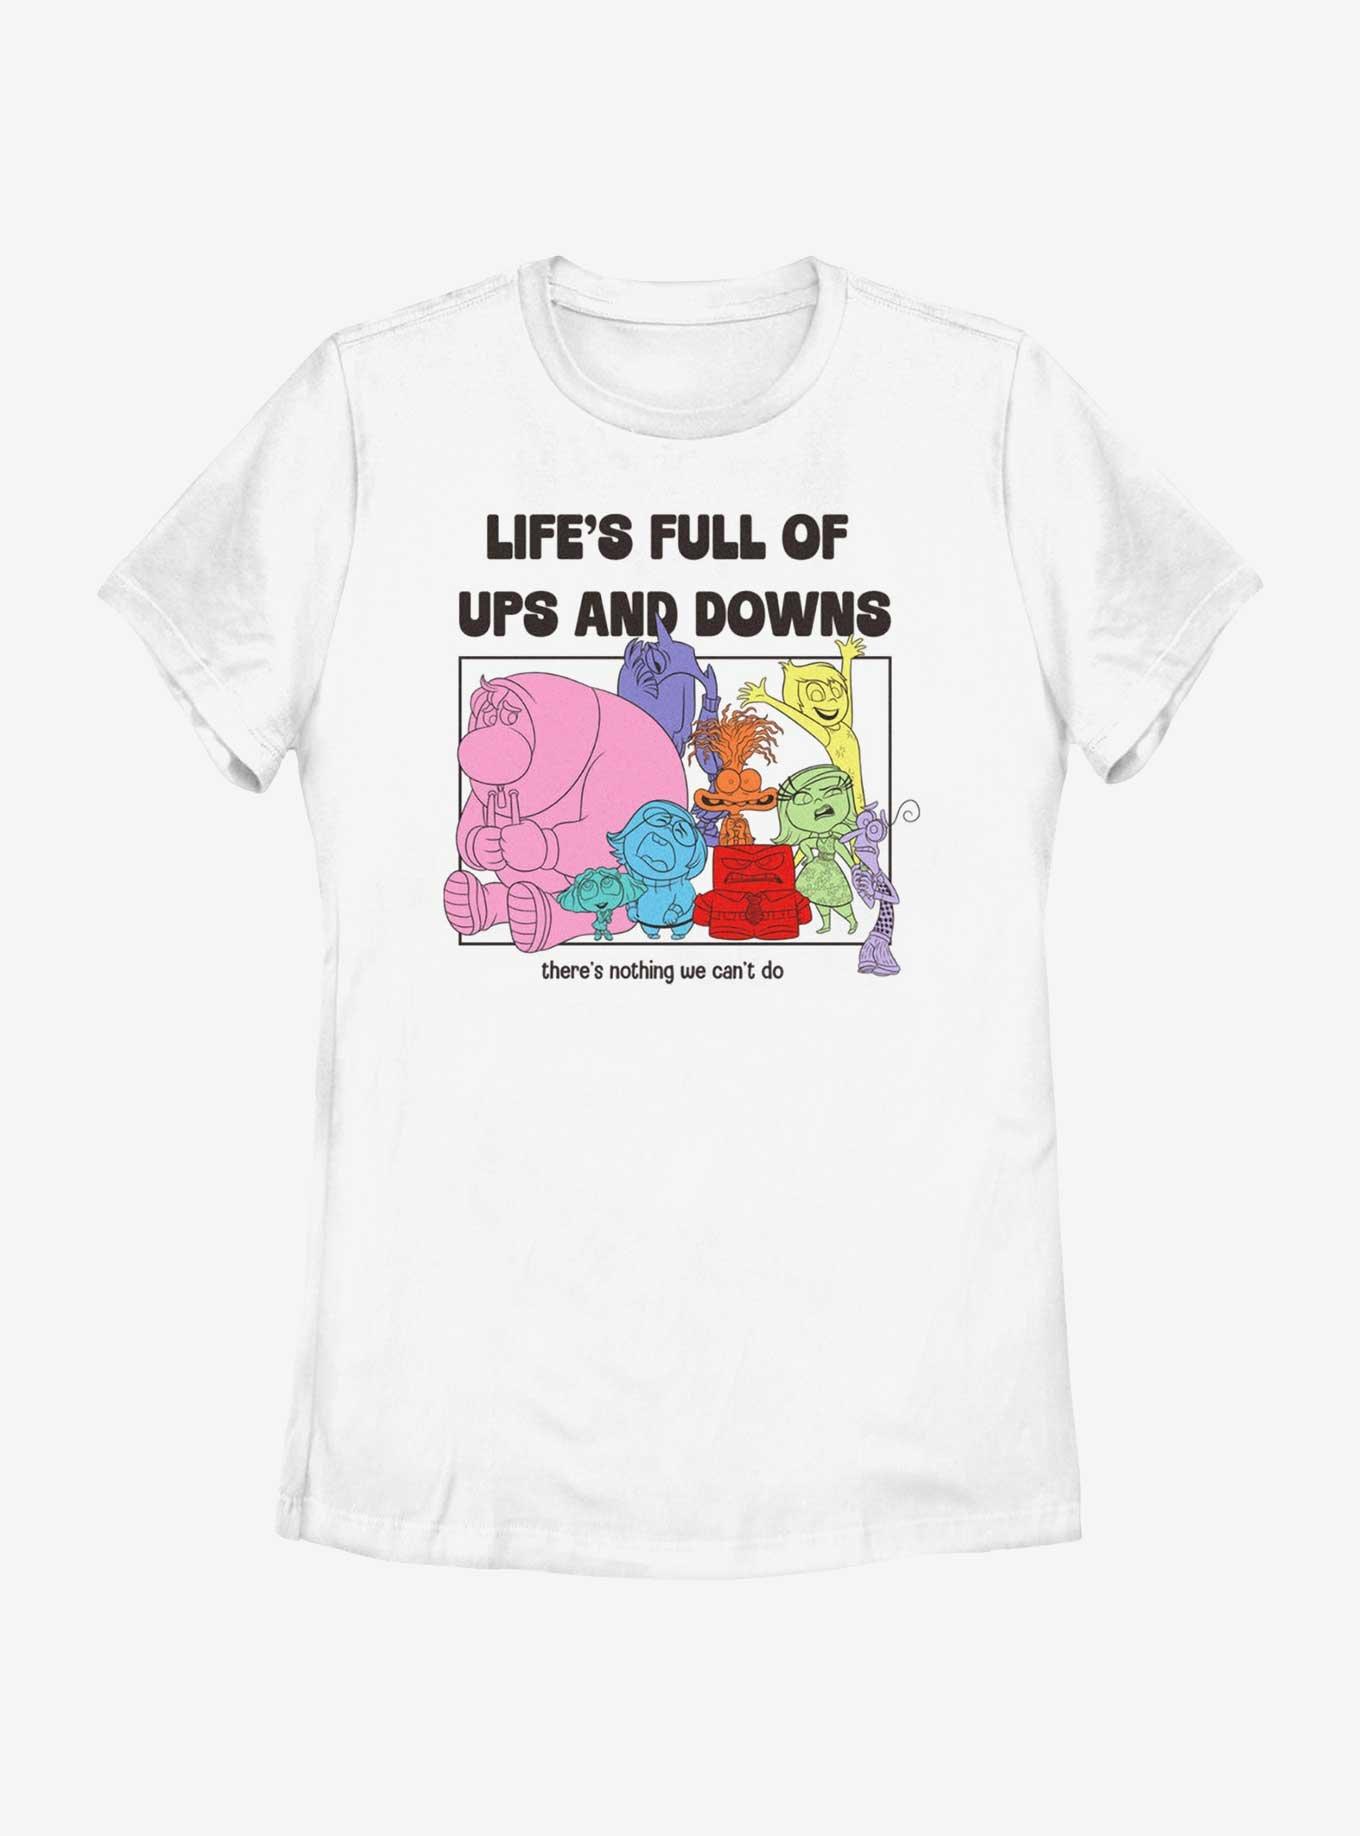 Disney Pixar Inside Out 2 Life's Full Of Ups And Downs Womens T-Shirt, WHITE, hi-res